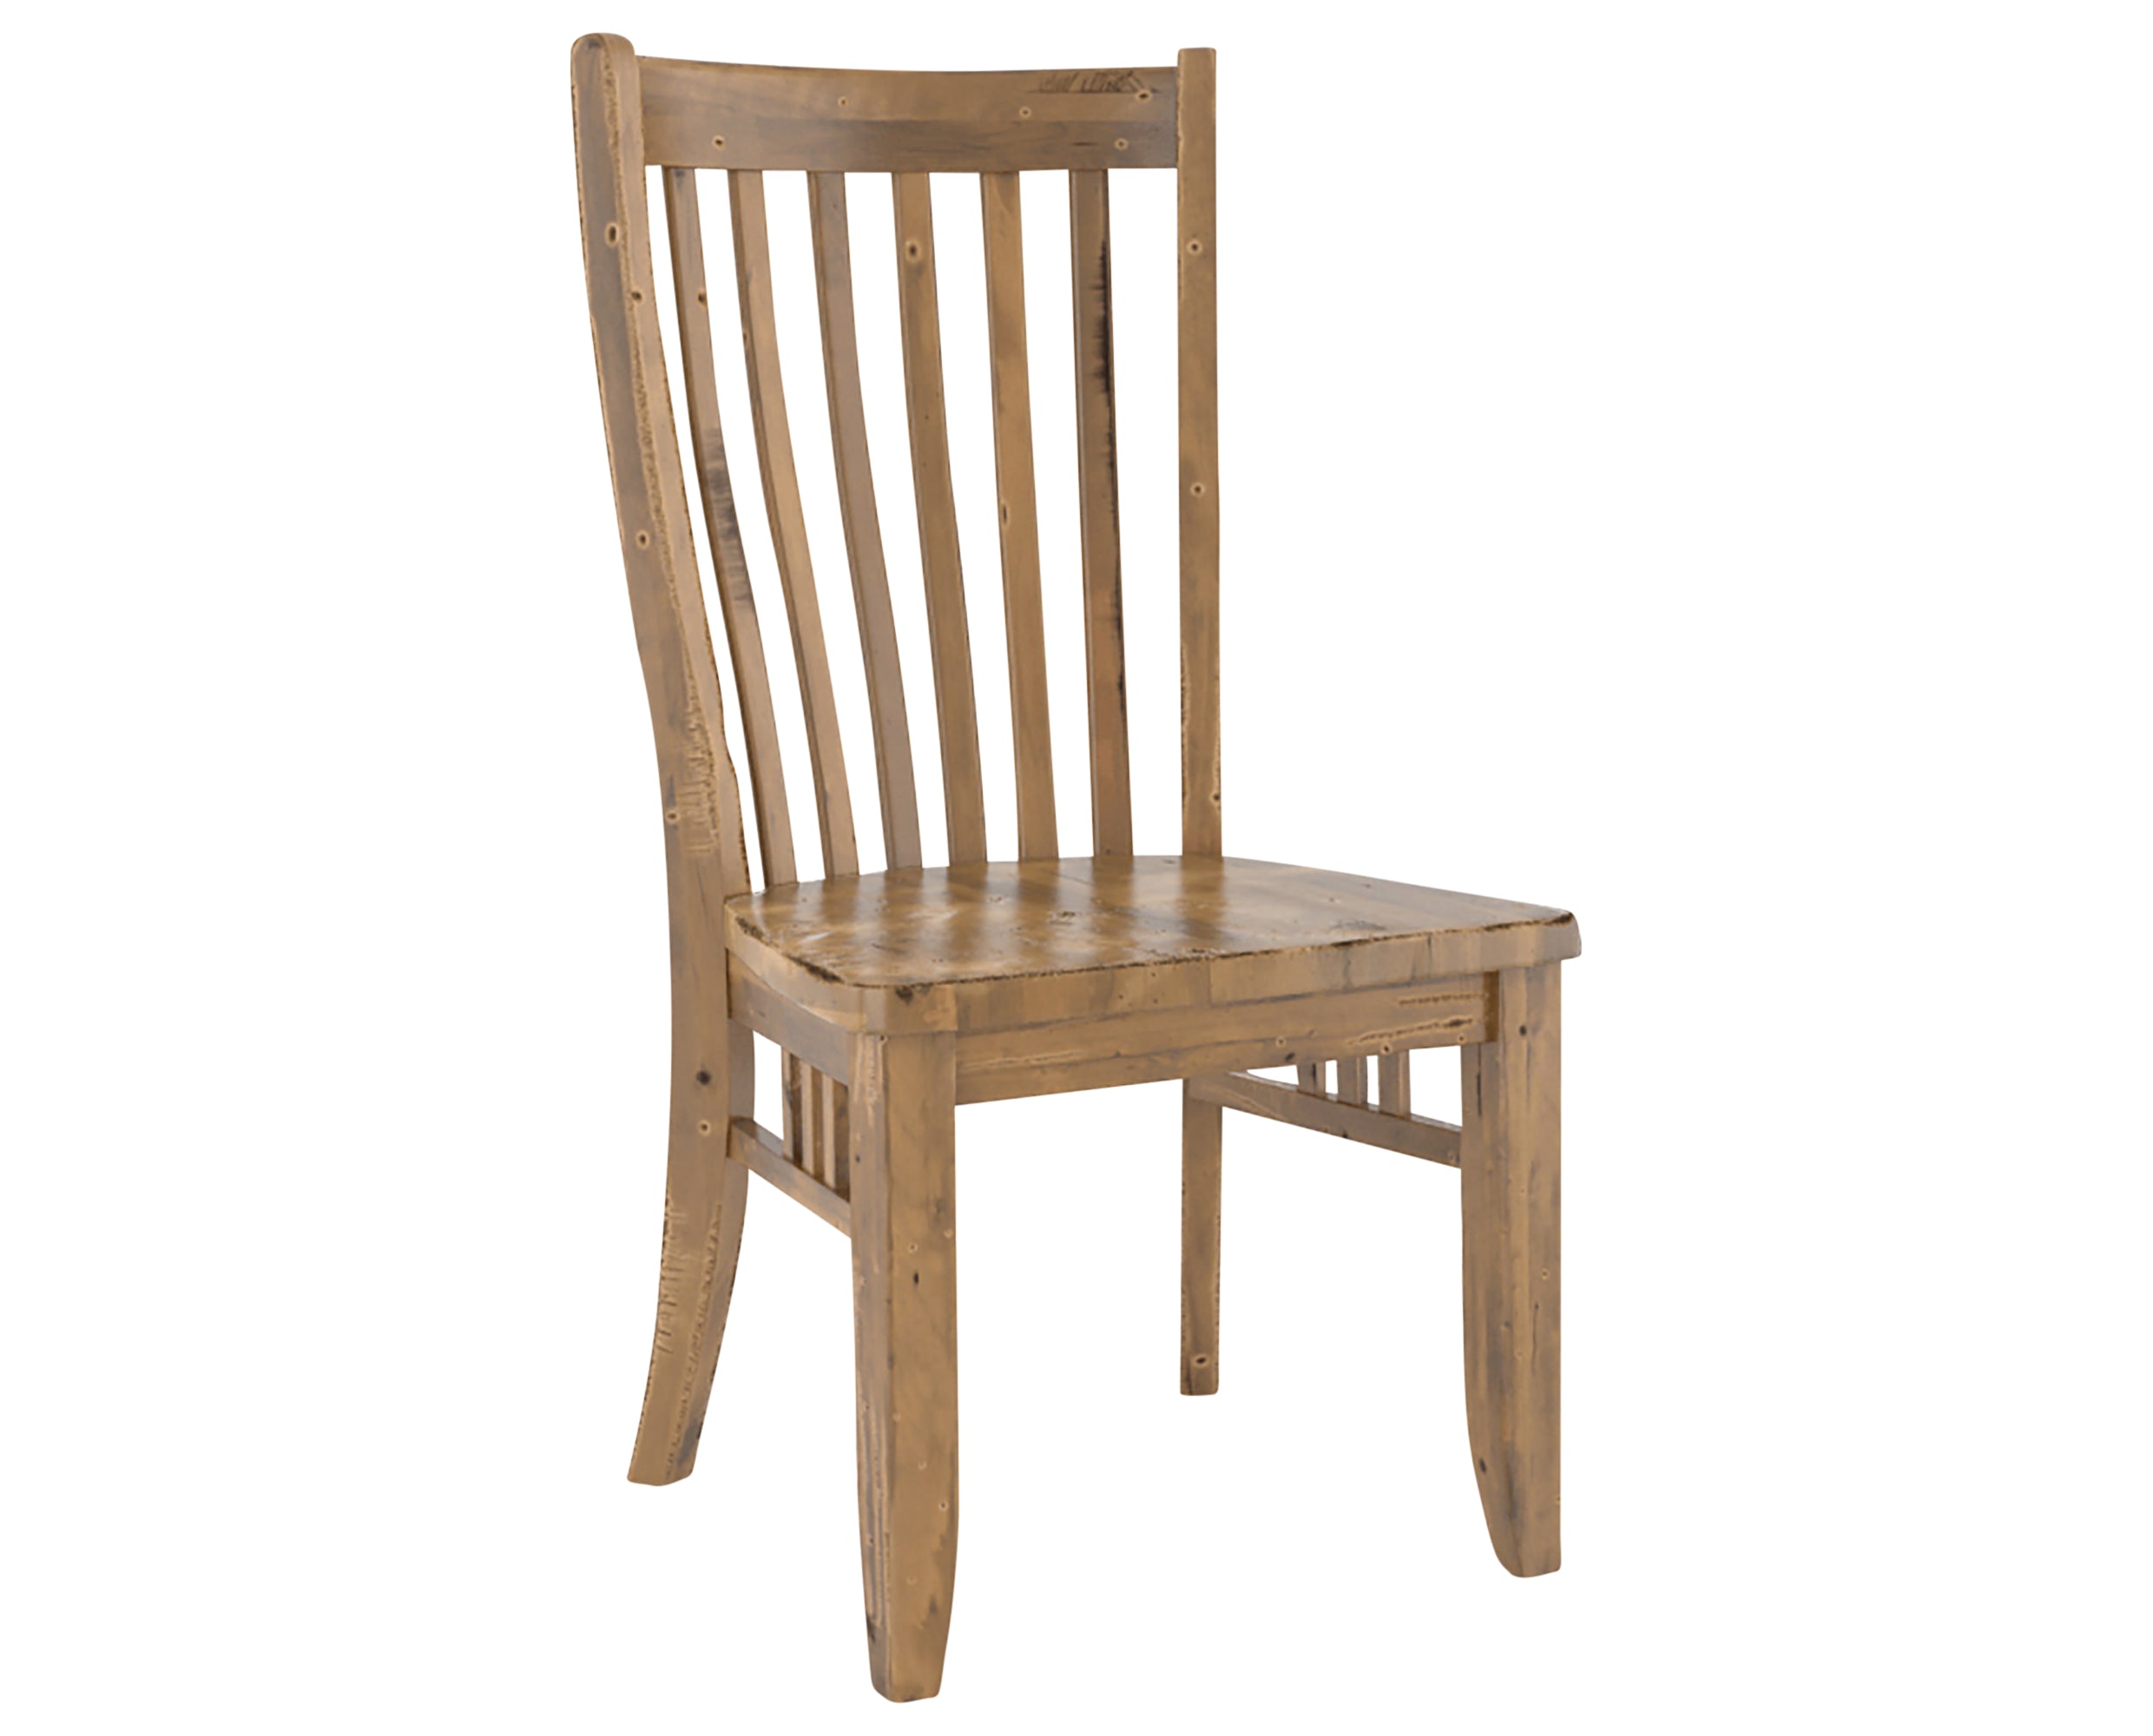 Oak Washed | Canadel Champlain Dining Chair 0119 | Valley Ridge Furniture